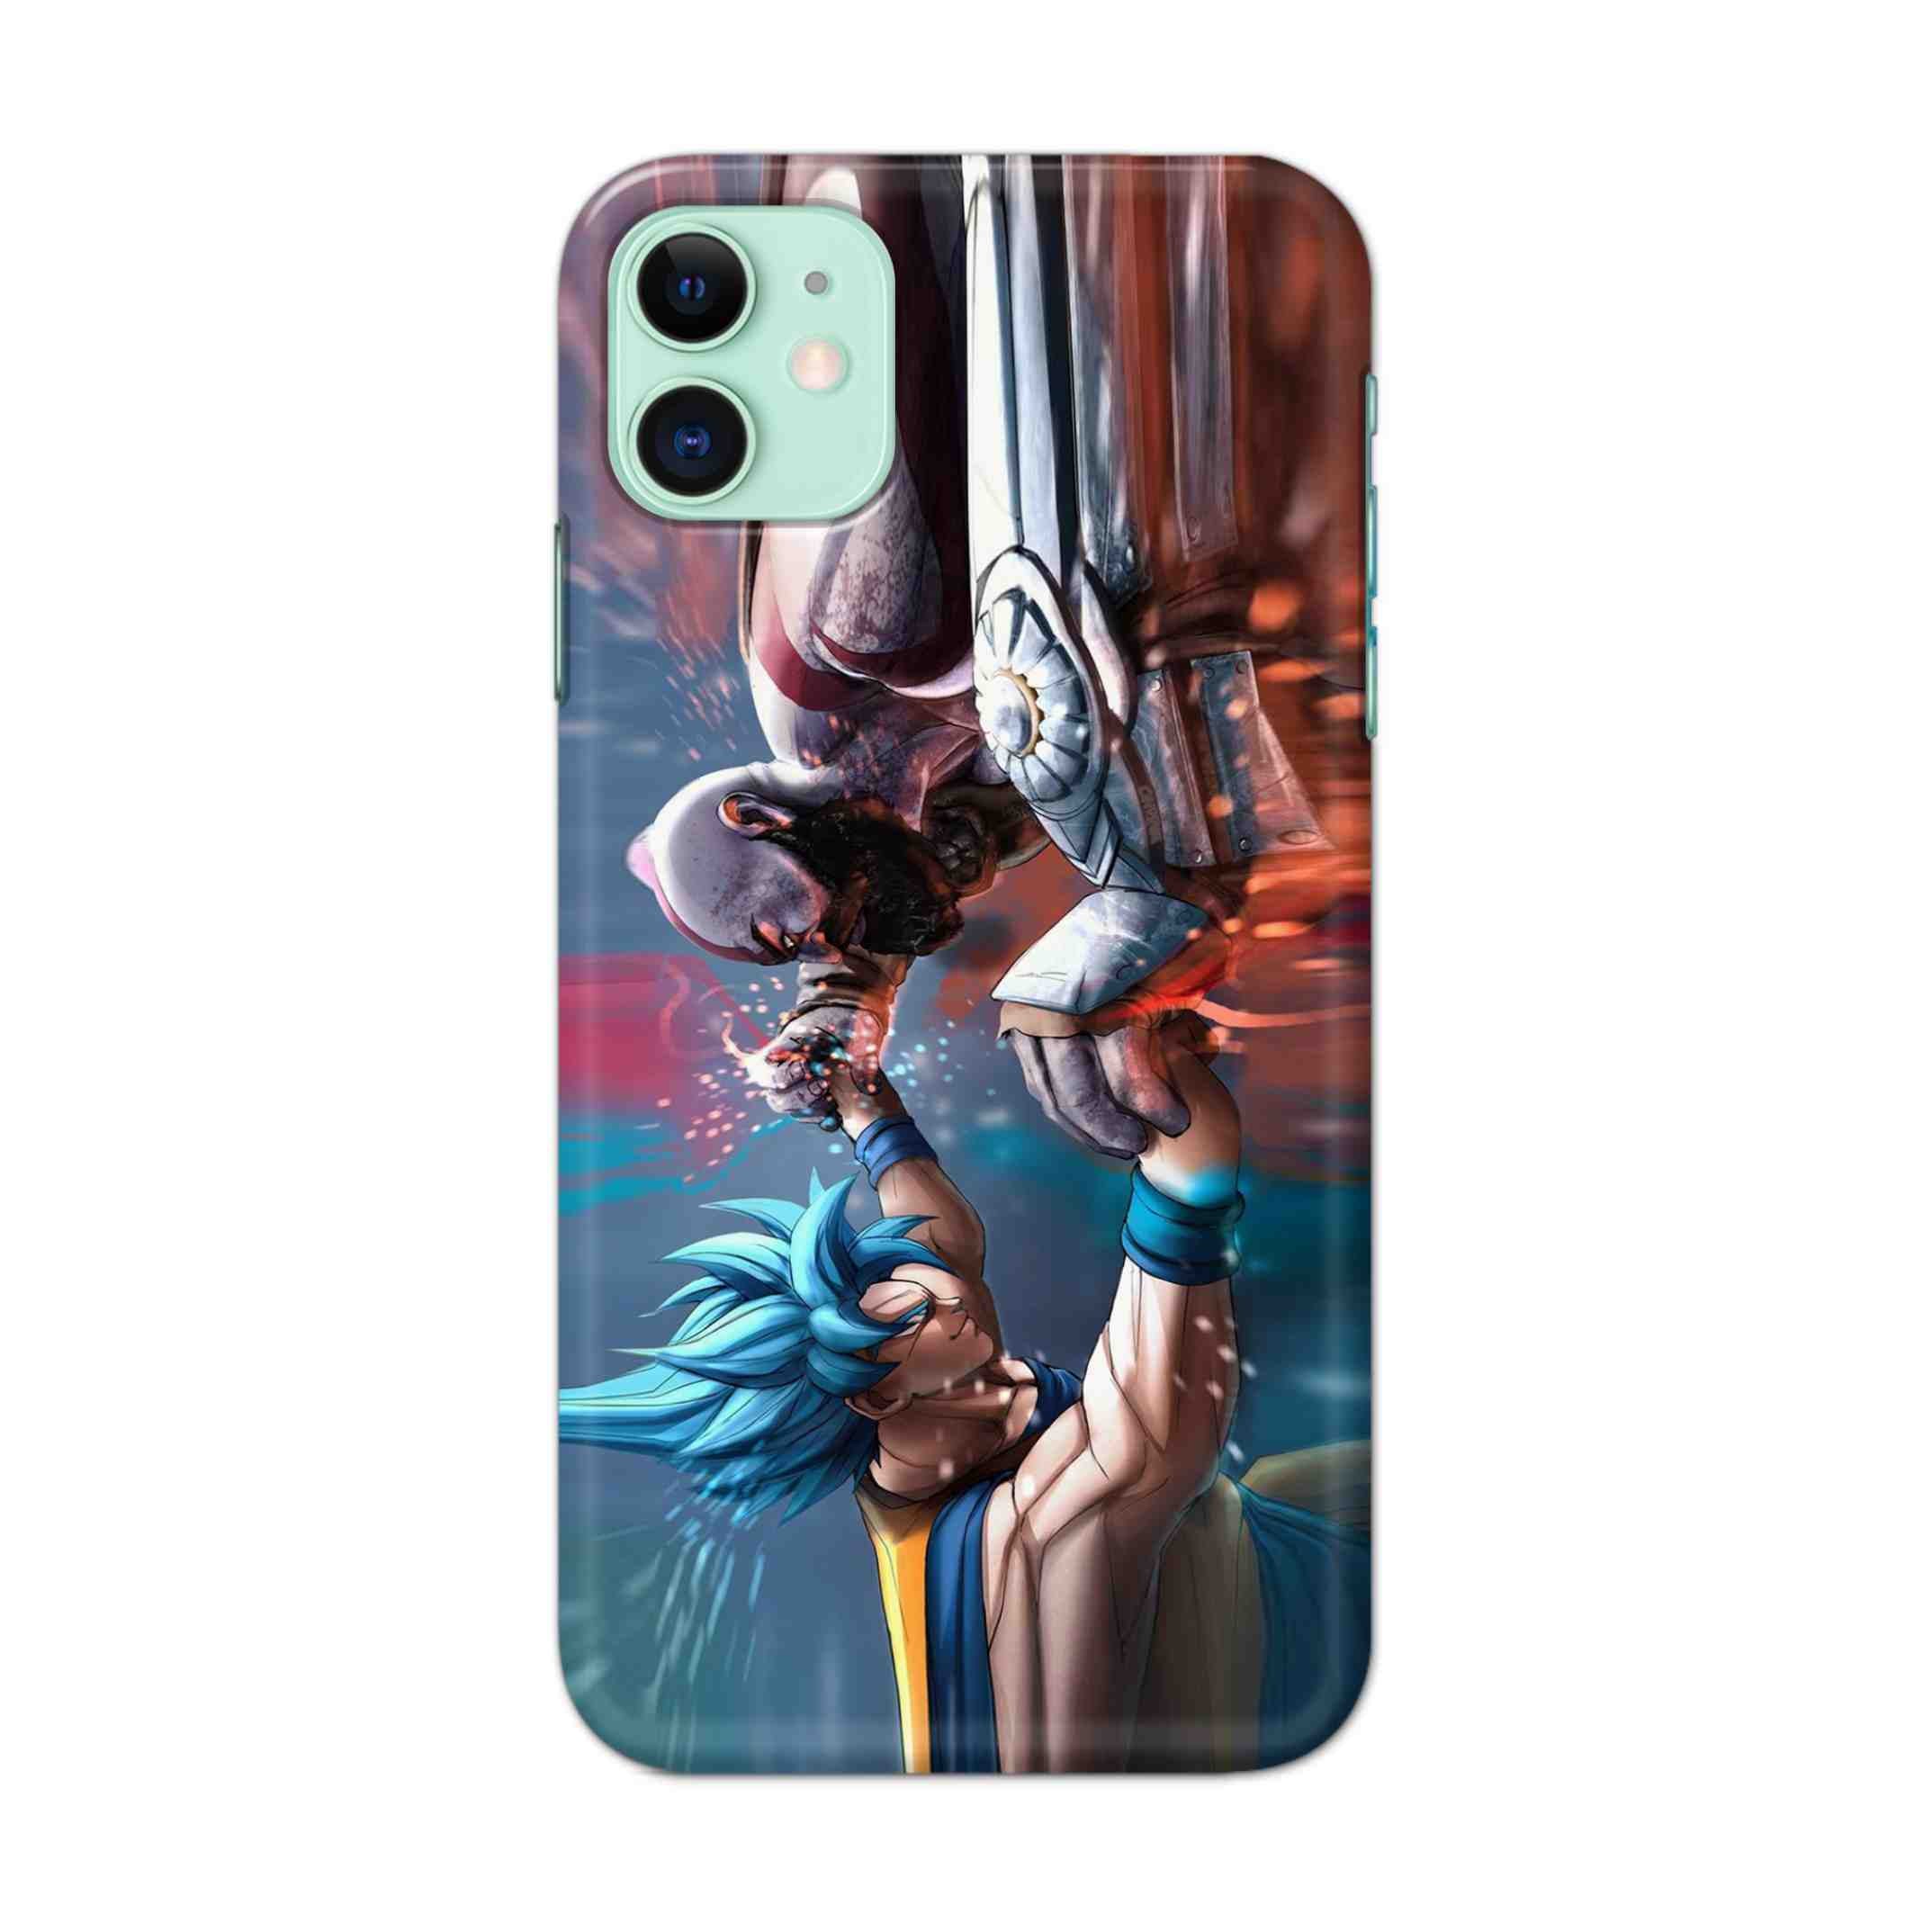 Buy Goku Vs Kratos Hard Back Mobile Phone Case/Cover For iPhone 11 Online